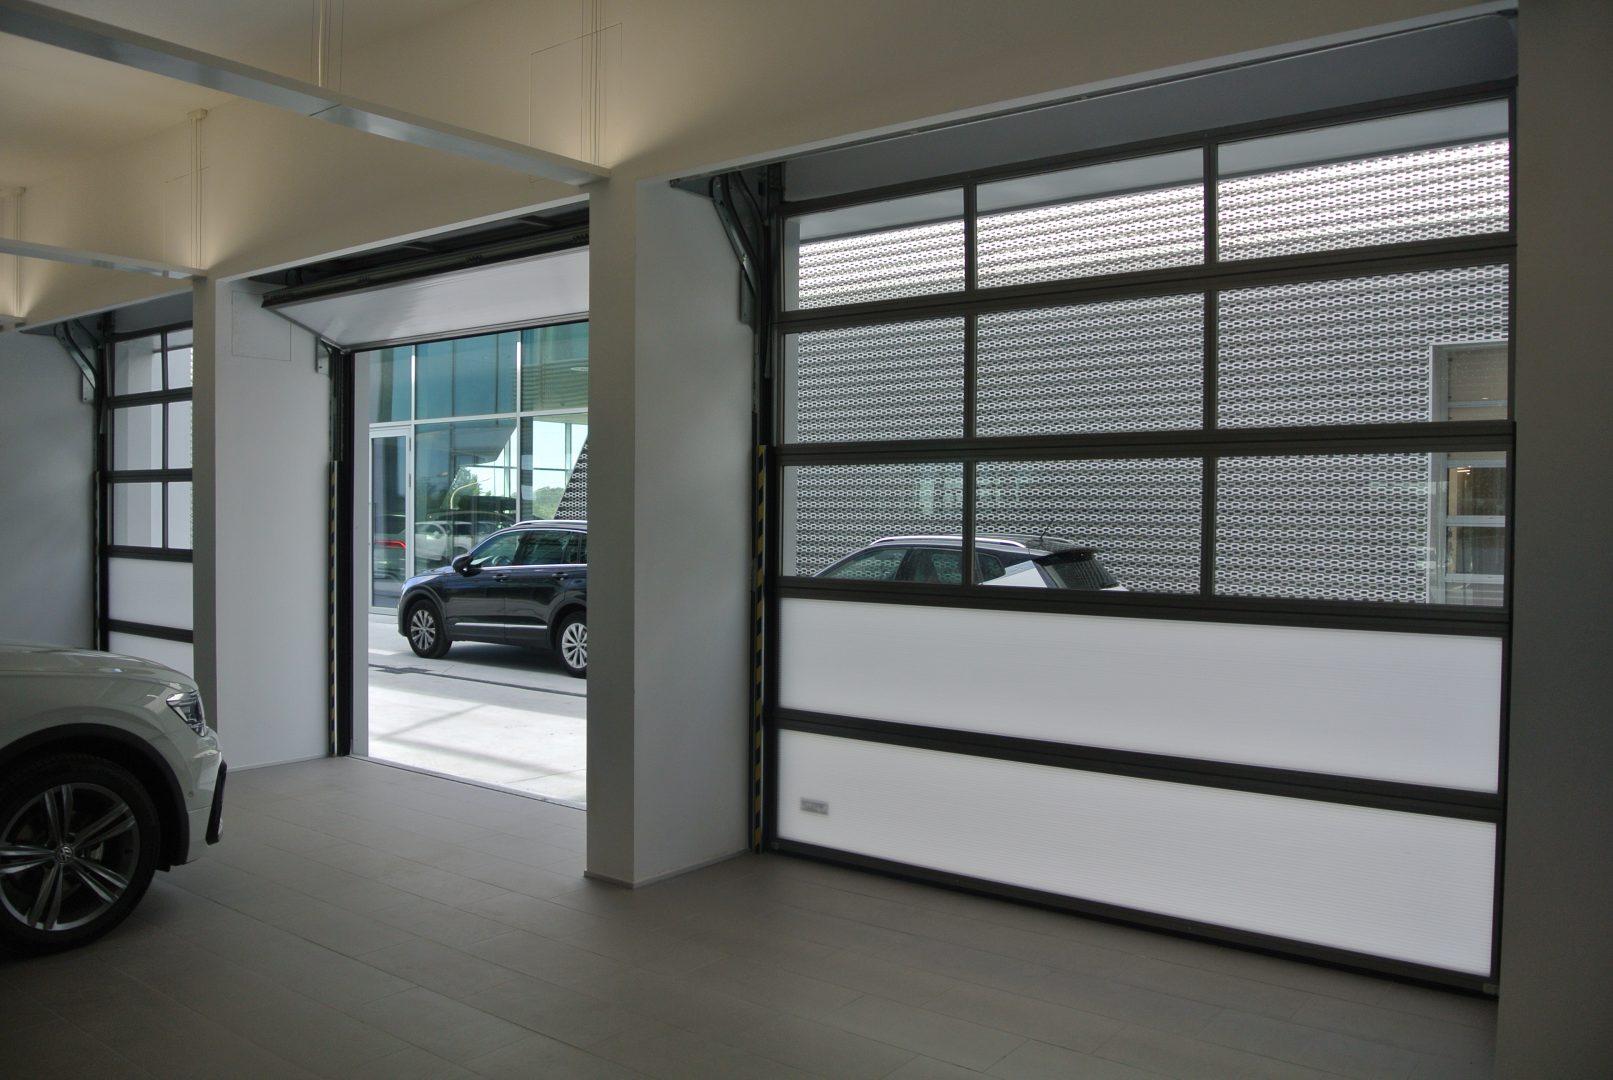 Concealed roller doors, match perfectly